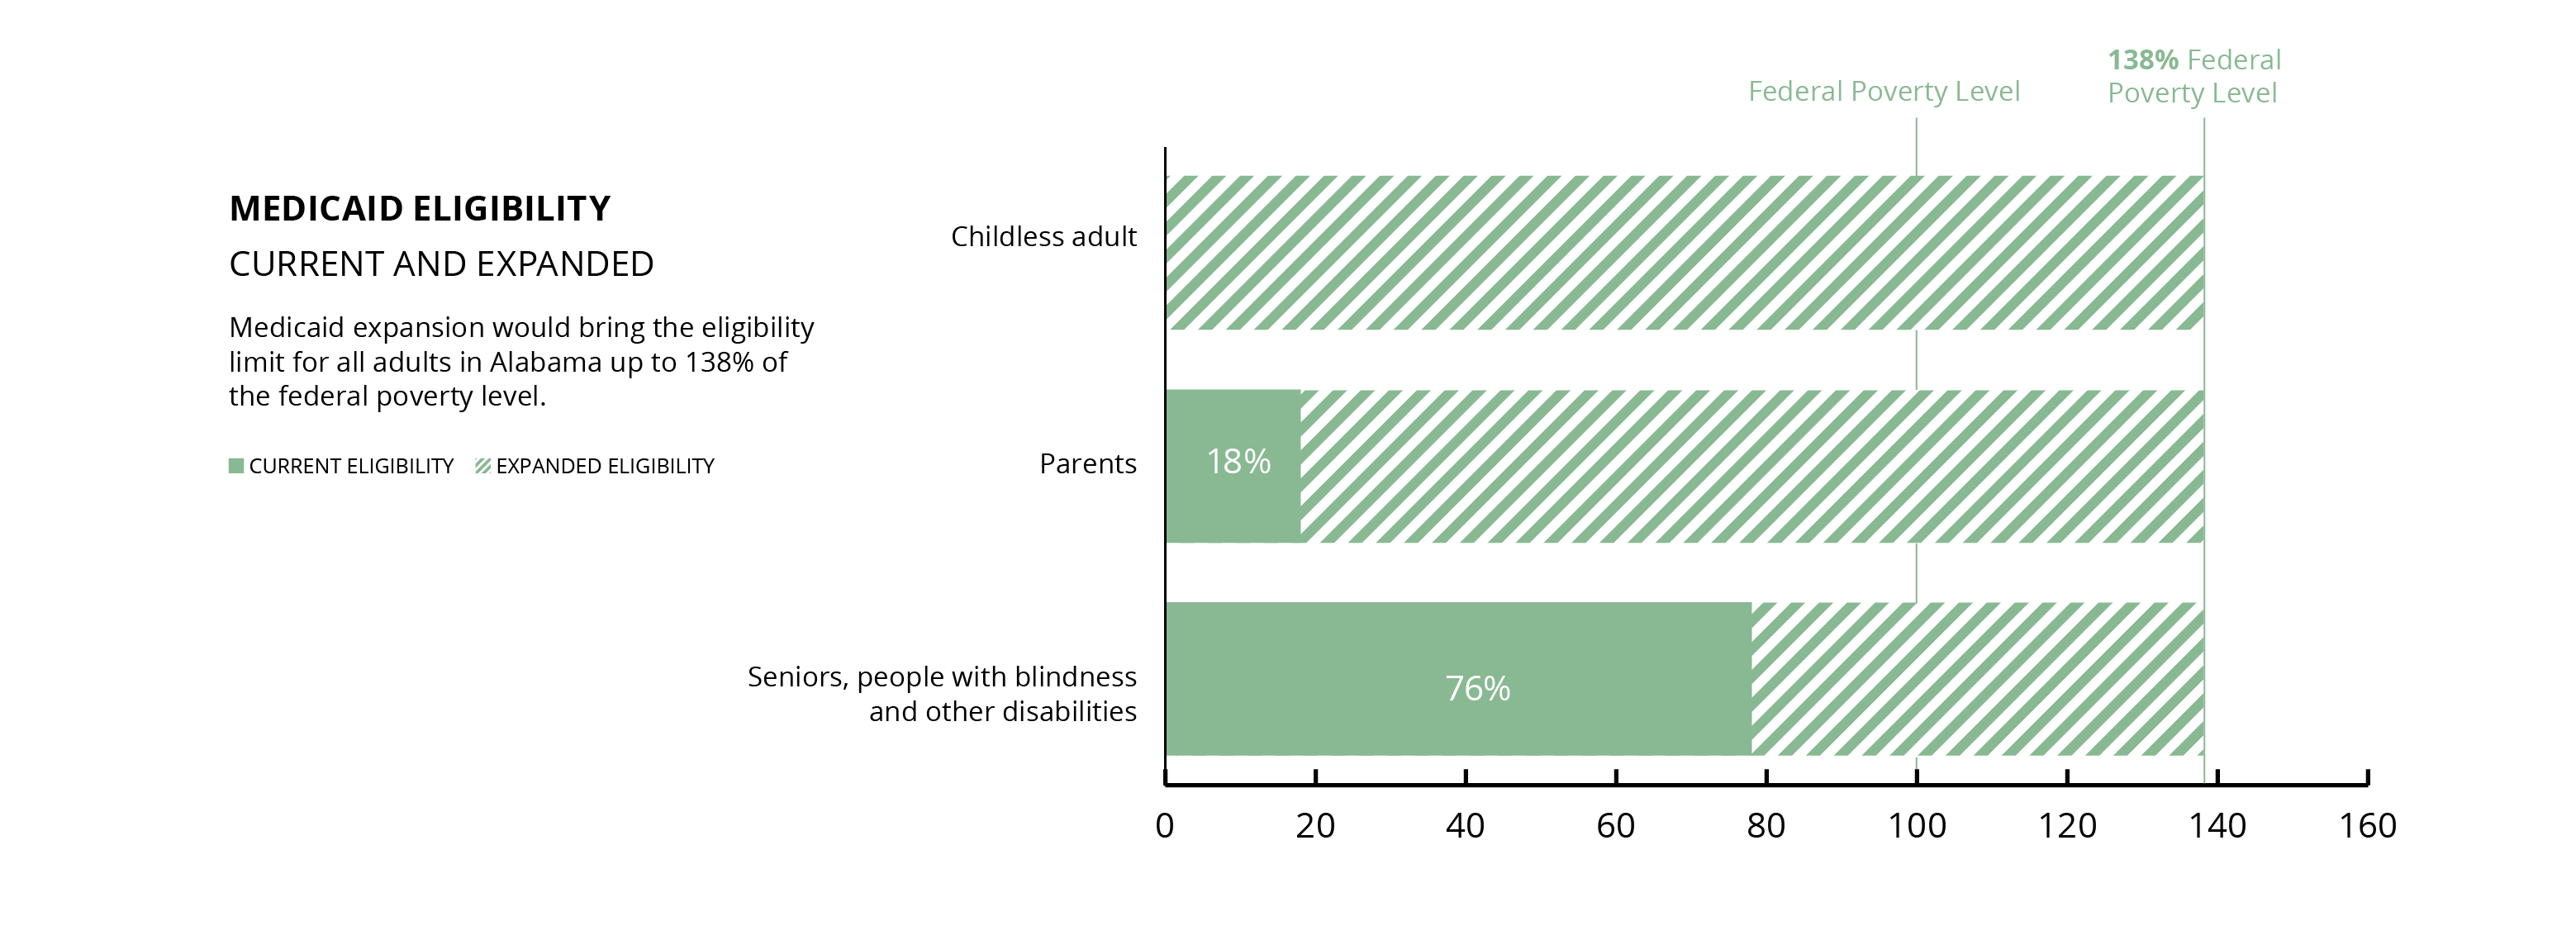 A bar graph showing Alabama's current Medicaid eligibilty and eligibility under expansion. Medicaid expansion would bring the eligibilty limit for all adults in Alabama up to 138% of the federal poverty level. Right now, the eligibility limit for parents is at 18% FPL, and the limit for seniors, people with blindness and other disabilites is at 76% FPL. Childless adults without a disability are not eligible right now.